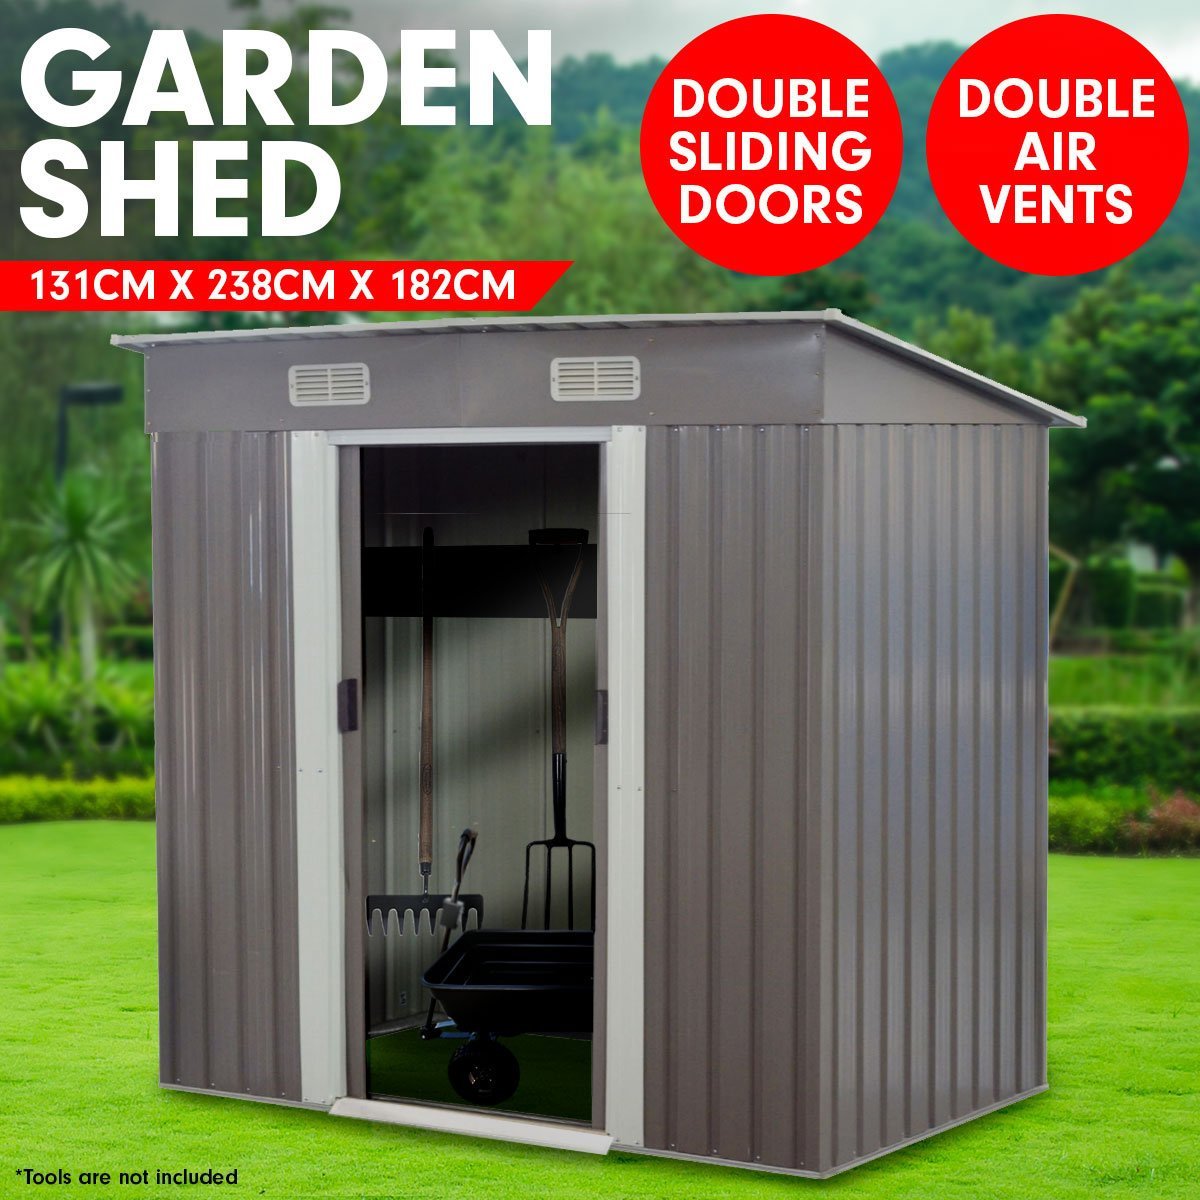 Shed Wallaroo 4ft x 8ft Garden Shed Sloped Roof Outdoor Storage - Grey